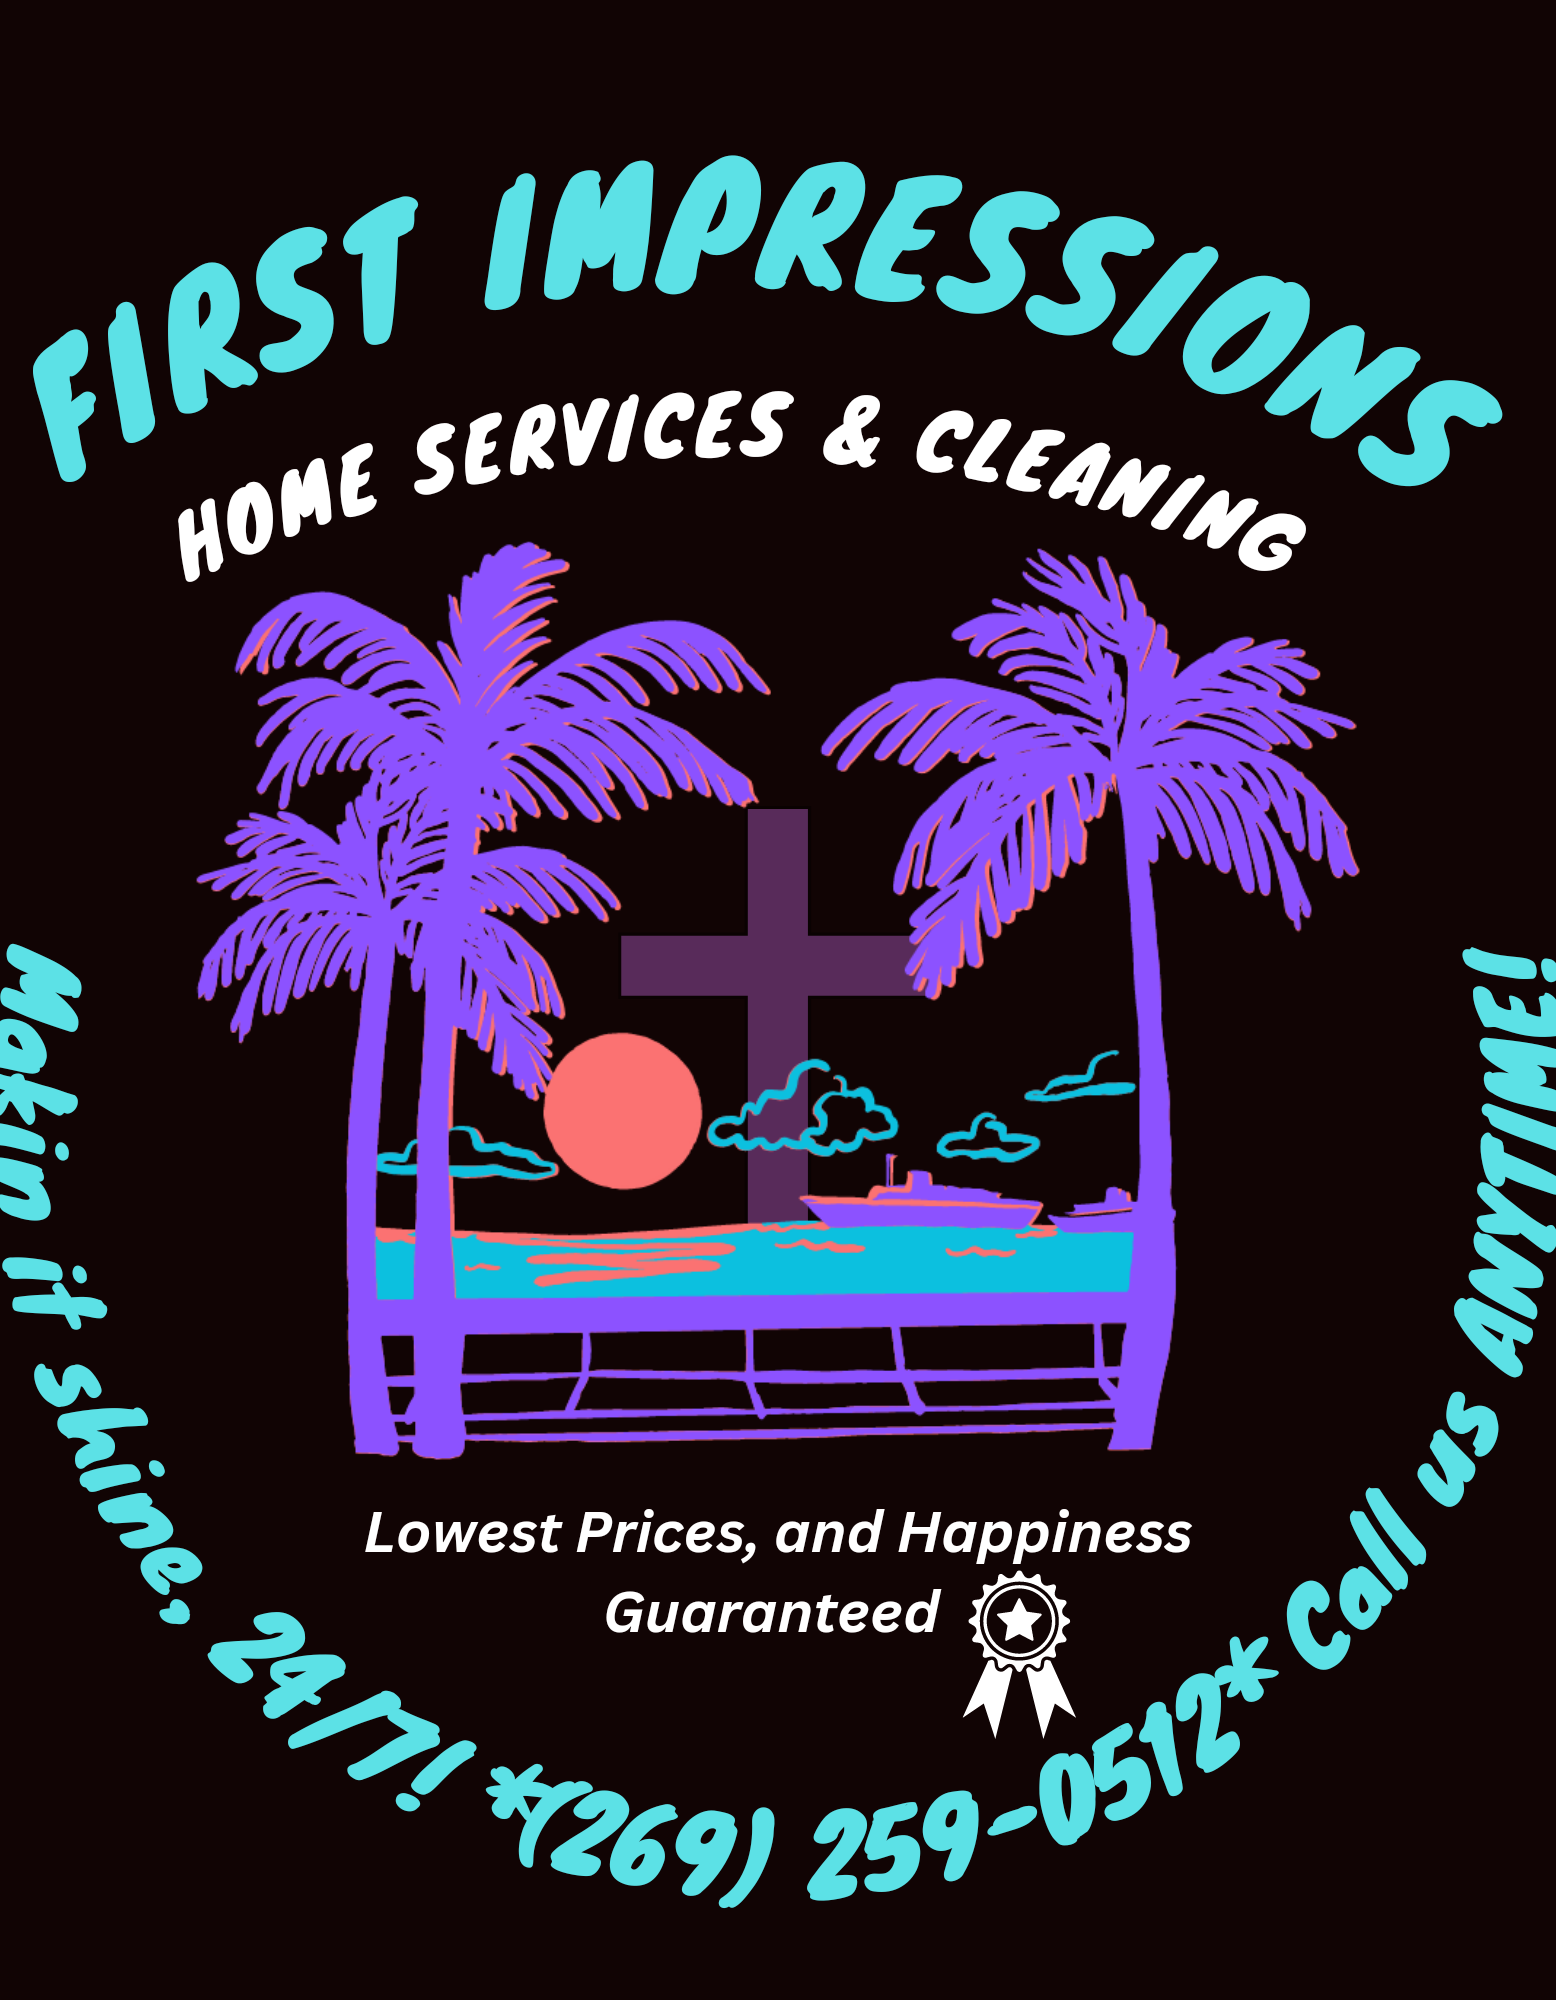 First Impressions Home Services and Cleaning 509 E State St, Cassopolis Michigan 49031